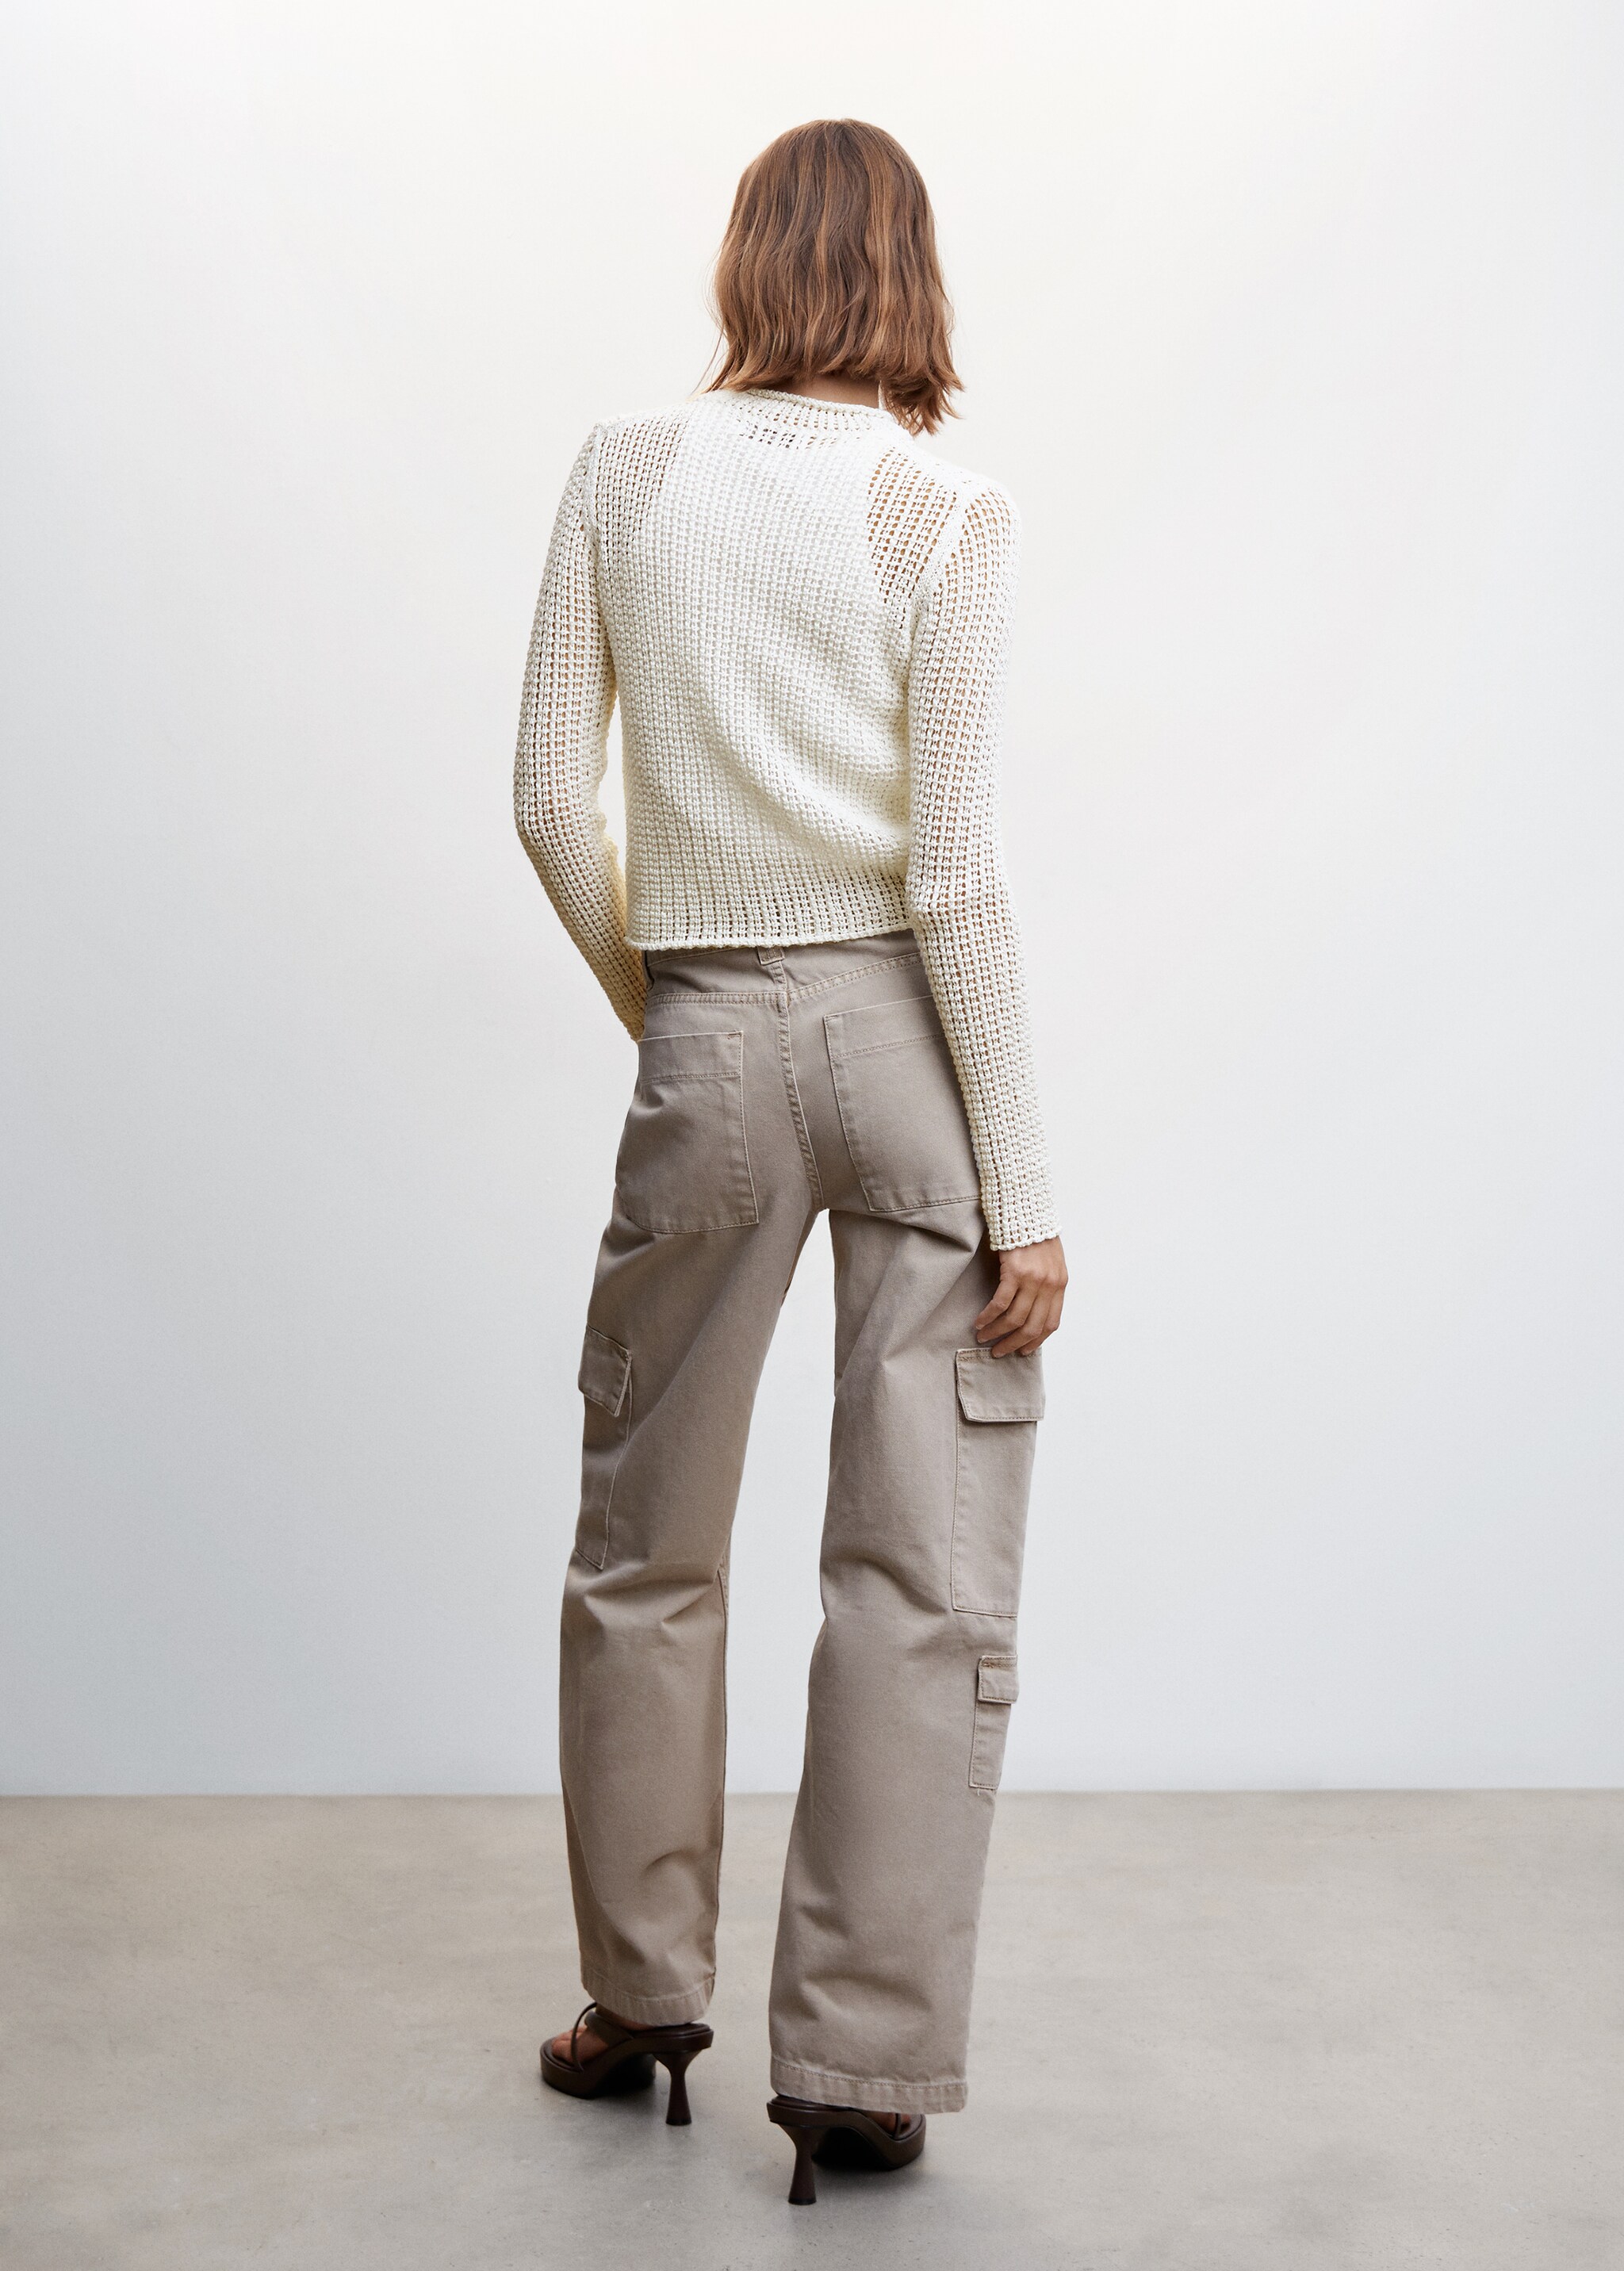 Openwork sweater with perkins collar - Reverse of the article